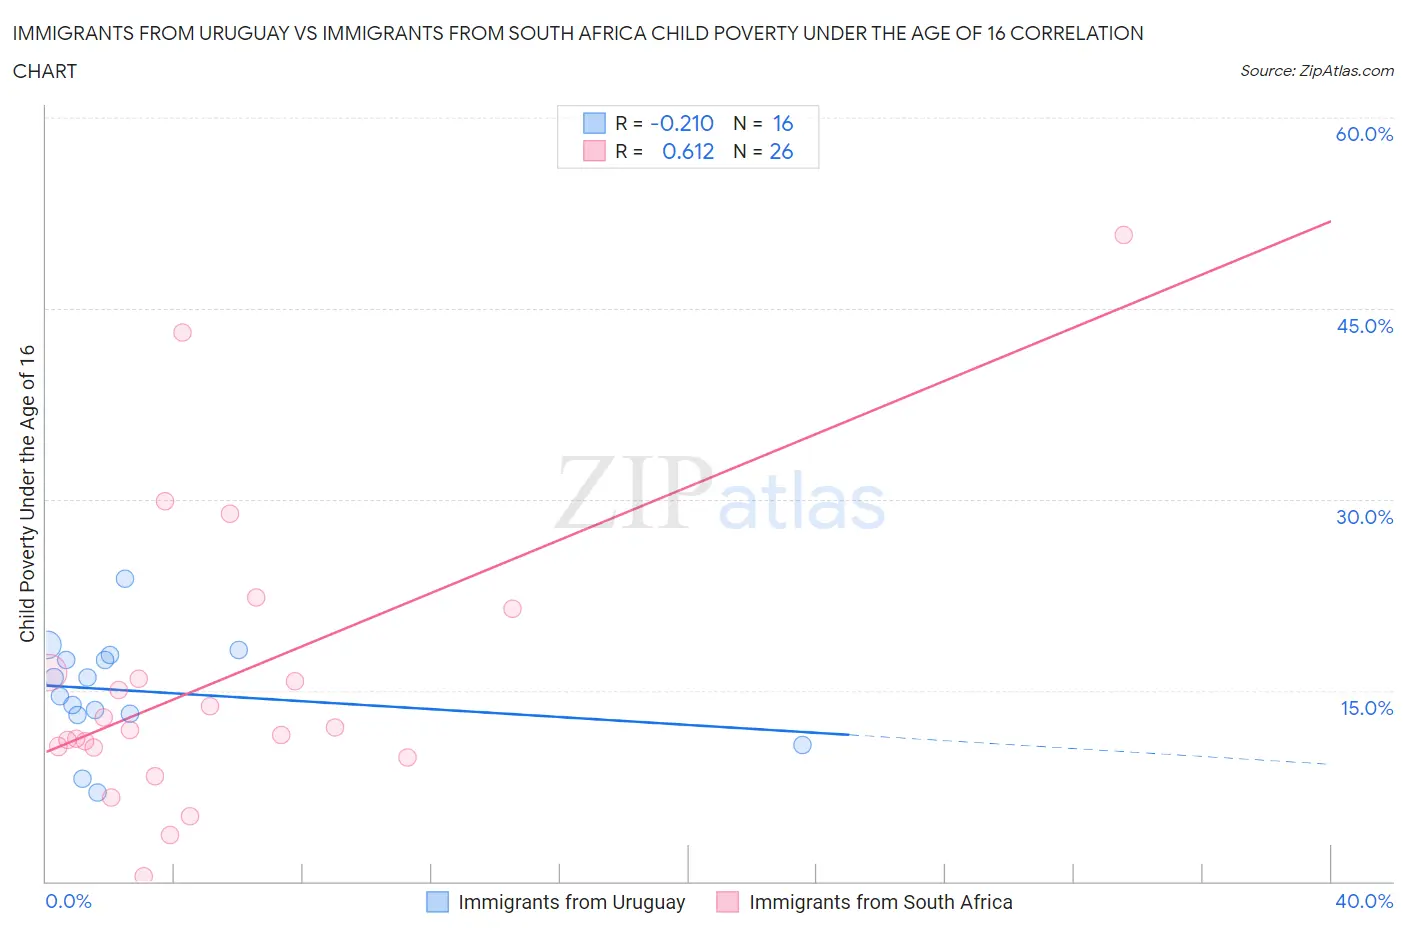 Immigrants from Uruguay vs Immigrants from South Africa Child Poverty Under the Age of 16